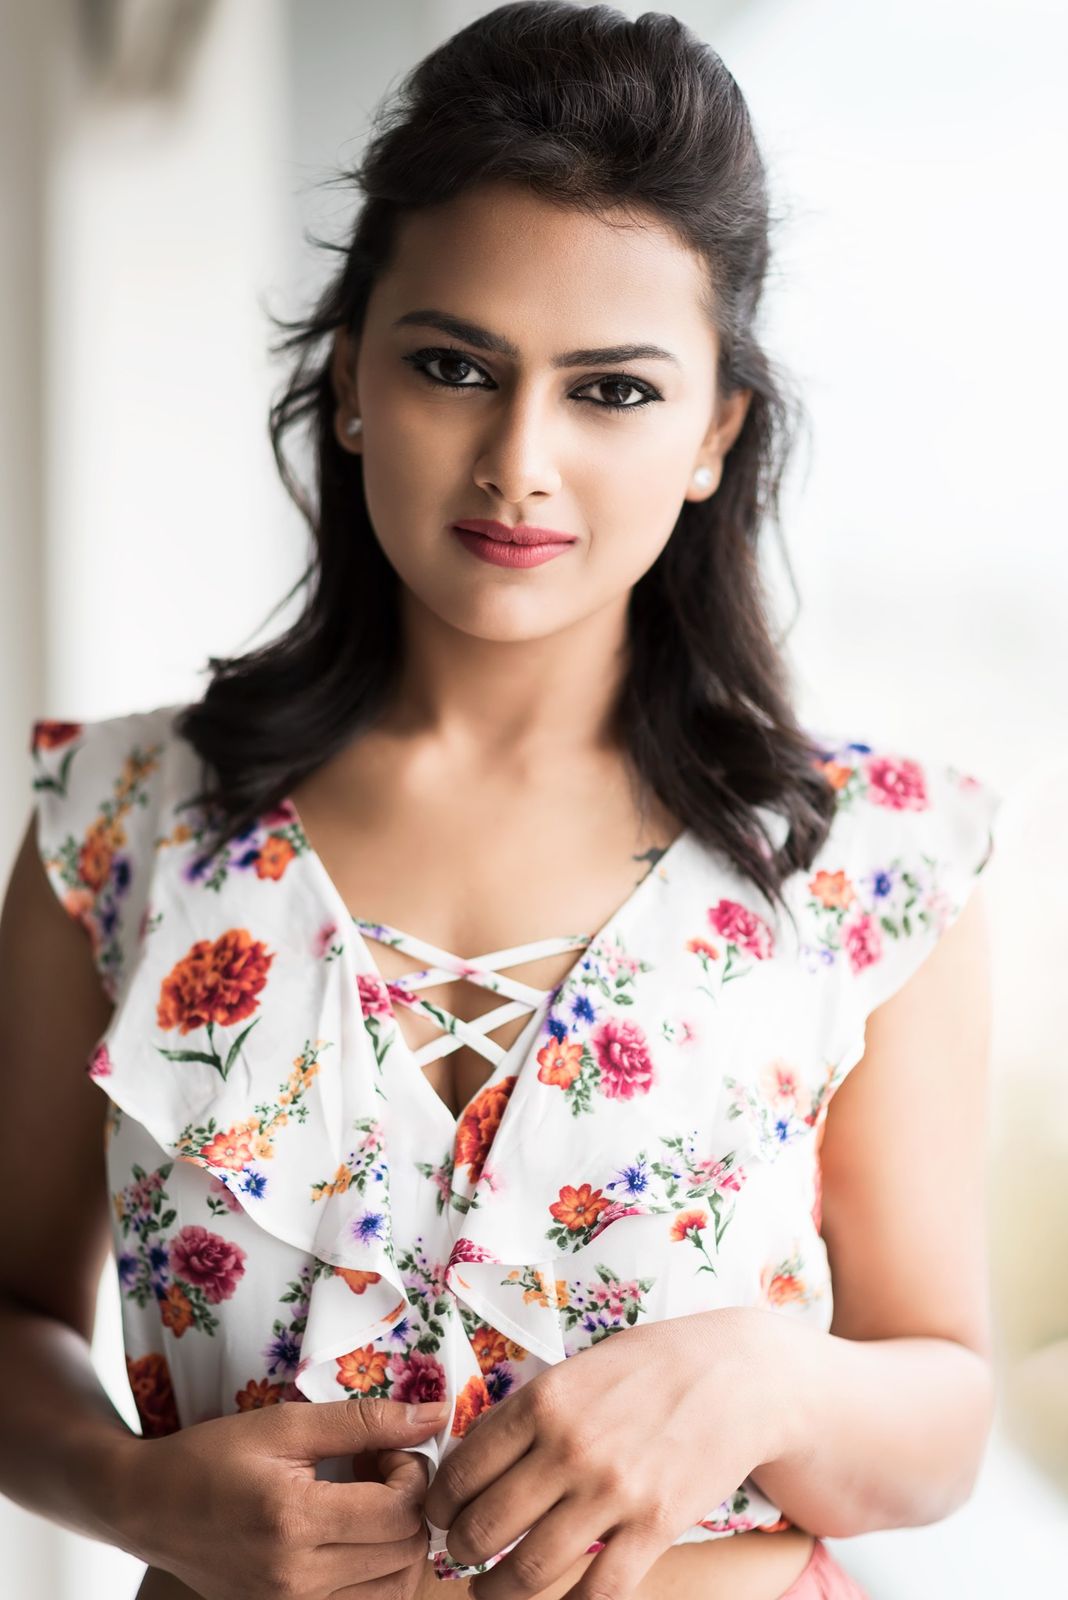 Shraddha Srinath Would Love To Direct Plays Someday 